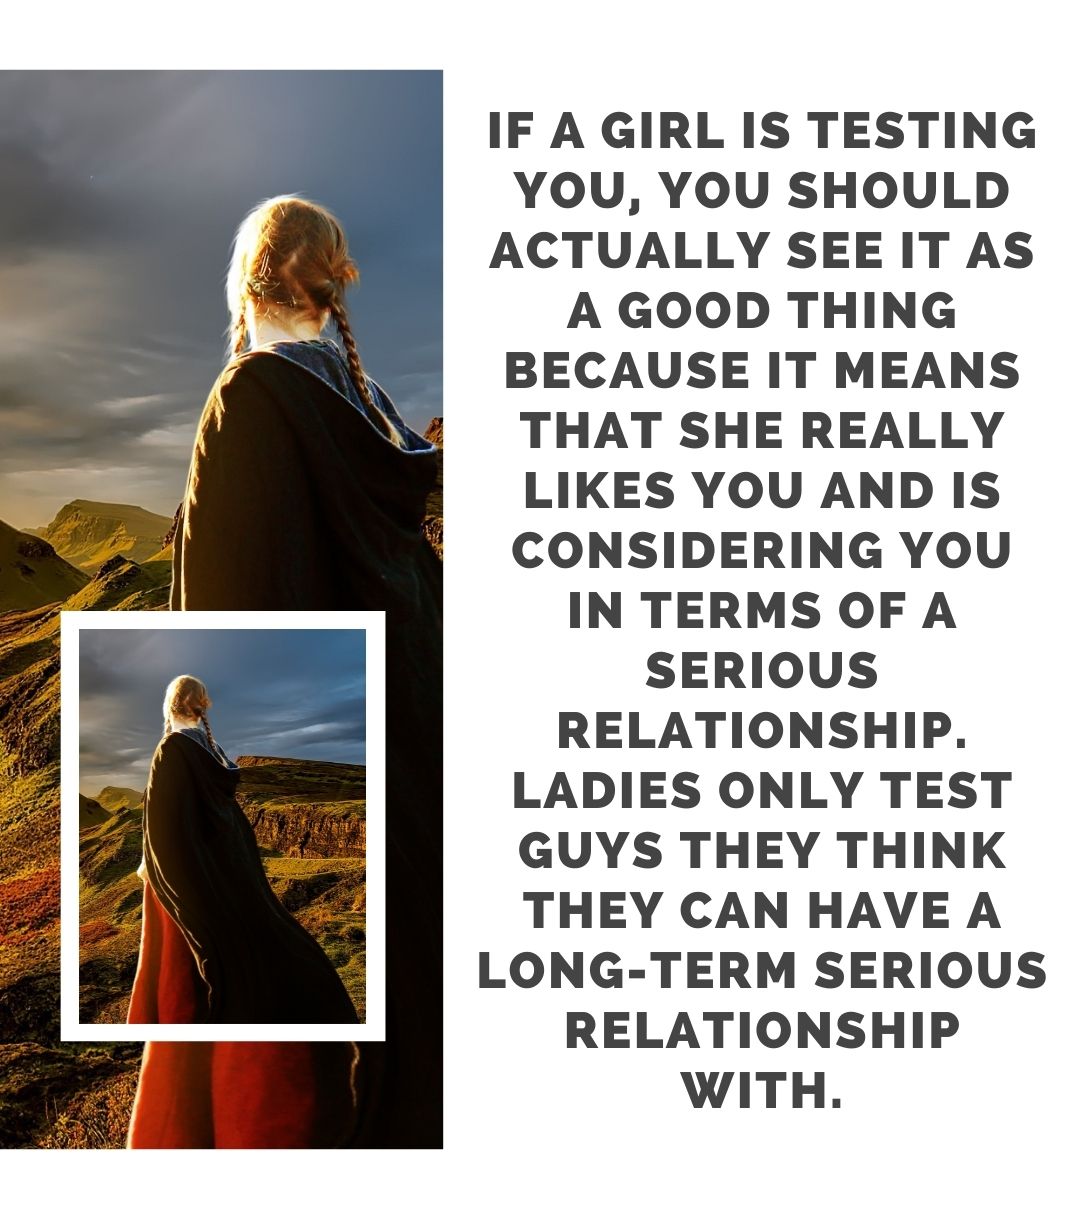 If a girl is testing you, you should actually see it as a good thing because it means that she really likes you and is considering you in terms of a serious relationship. Ladies only test guys they think they can have a long-term serious relationship with.